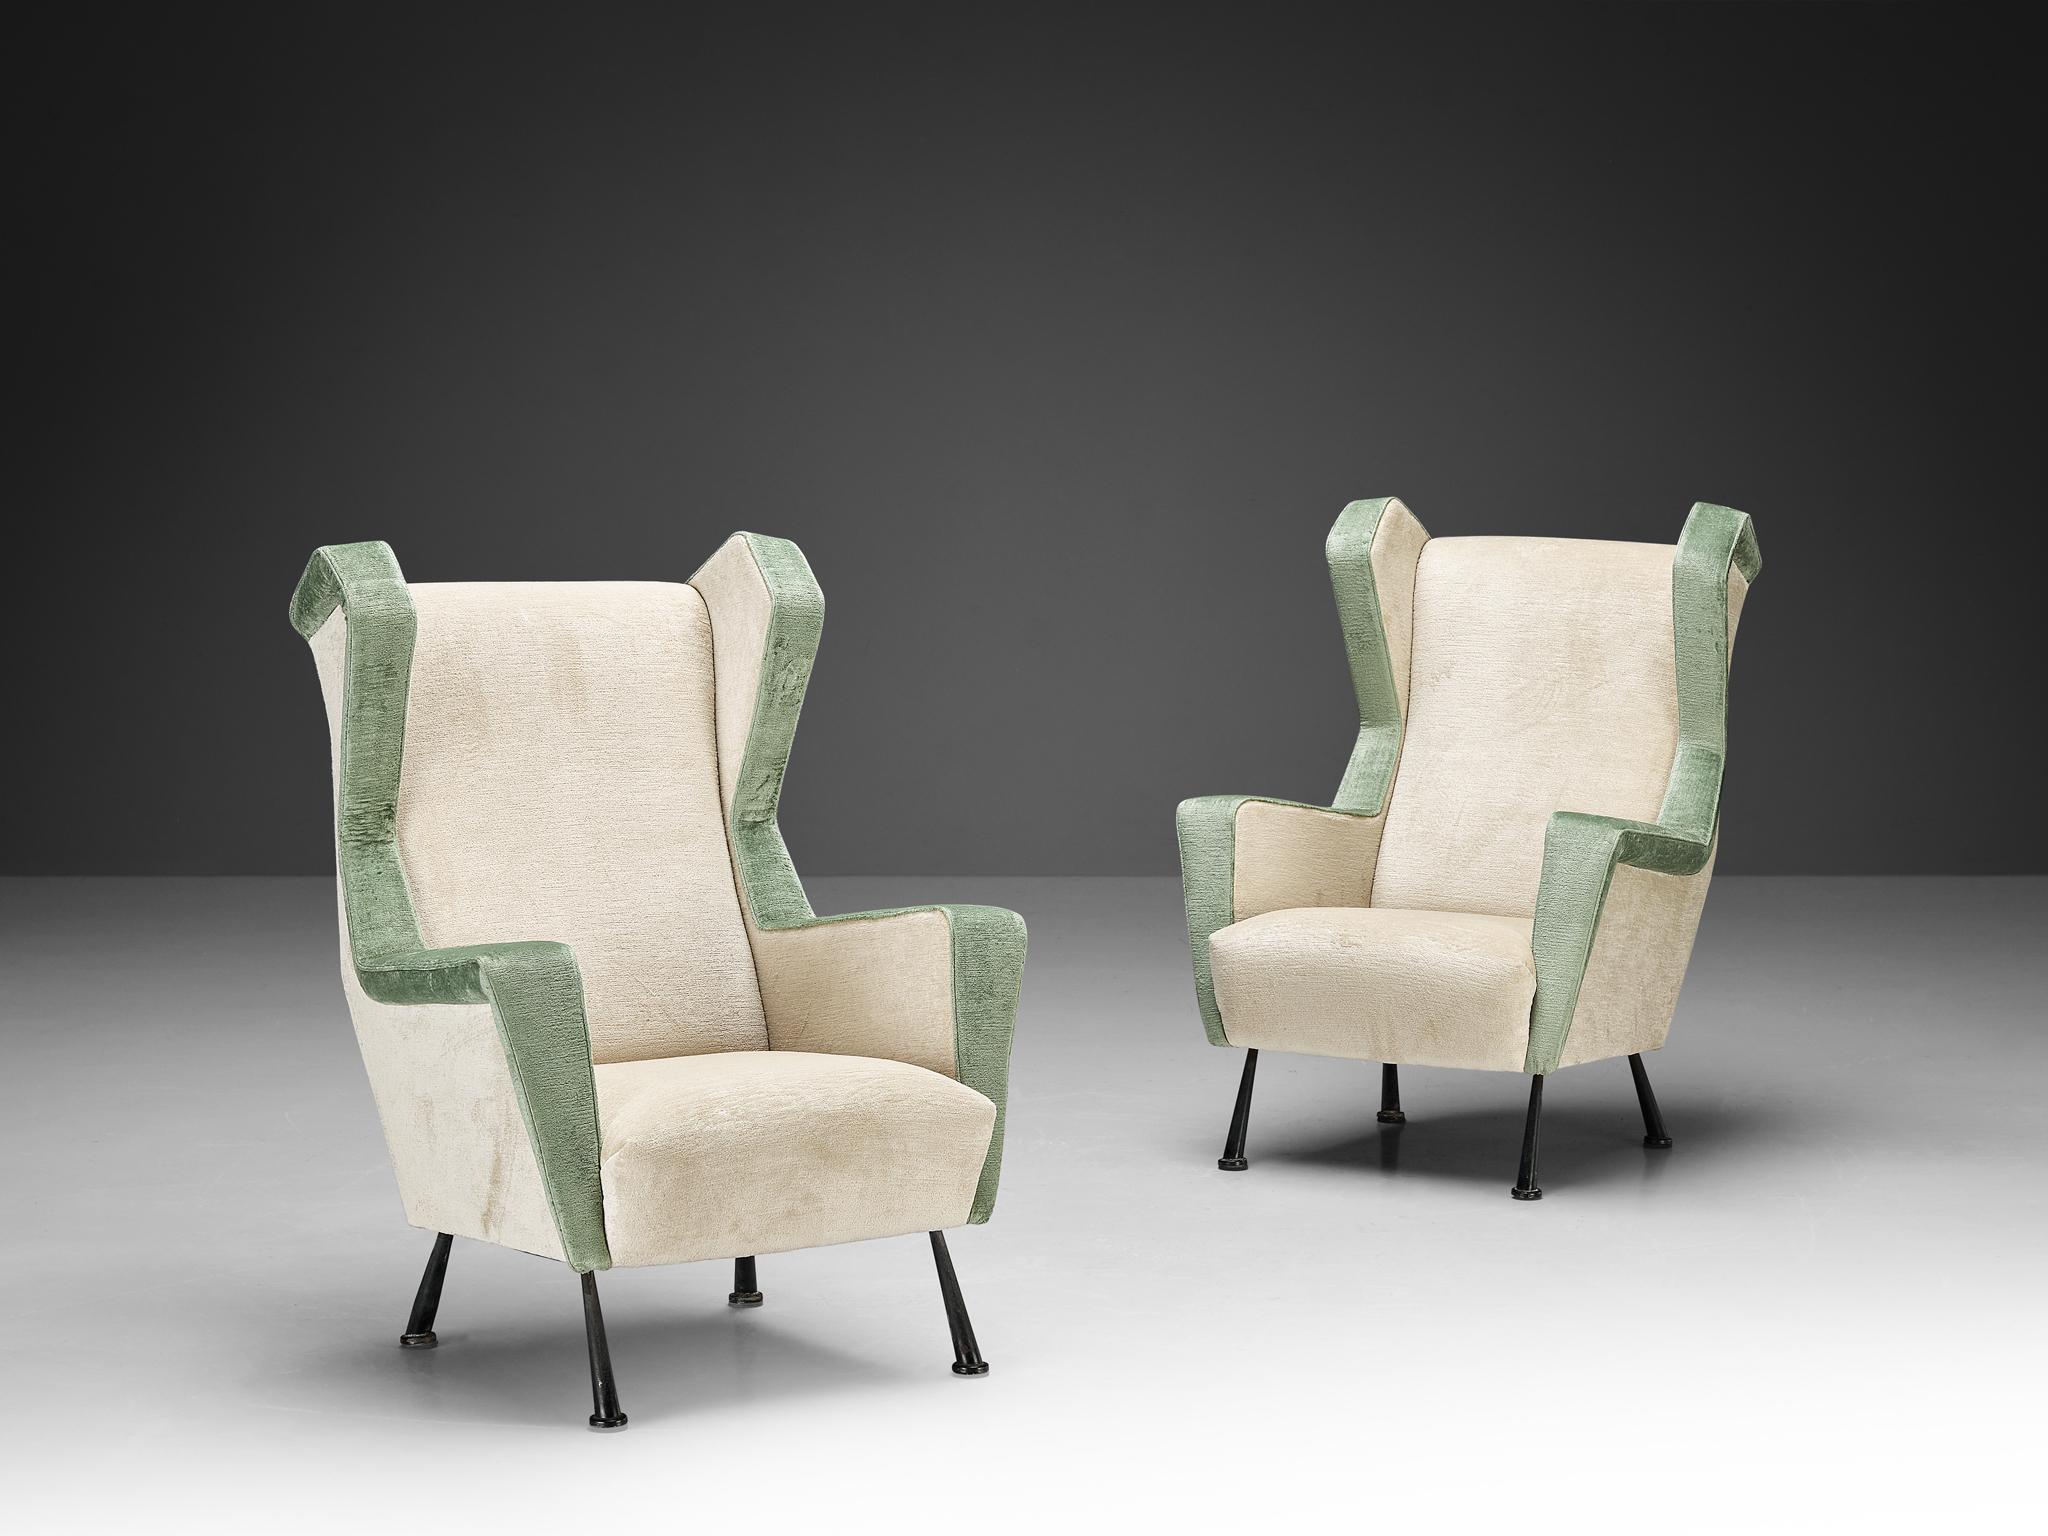 Pair of easy chairs, Pierre Frey 'Georges' velvet upholstery, coated metal, Italy, ca. 1950.

This set of angular lounge chairs is both voluptuous and grand as they are comfortable. The chairs have semi high wingbacks and feature off-white and mint 